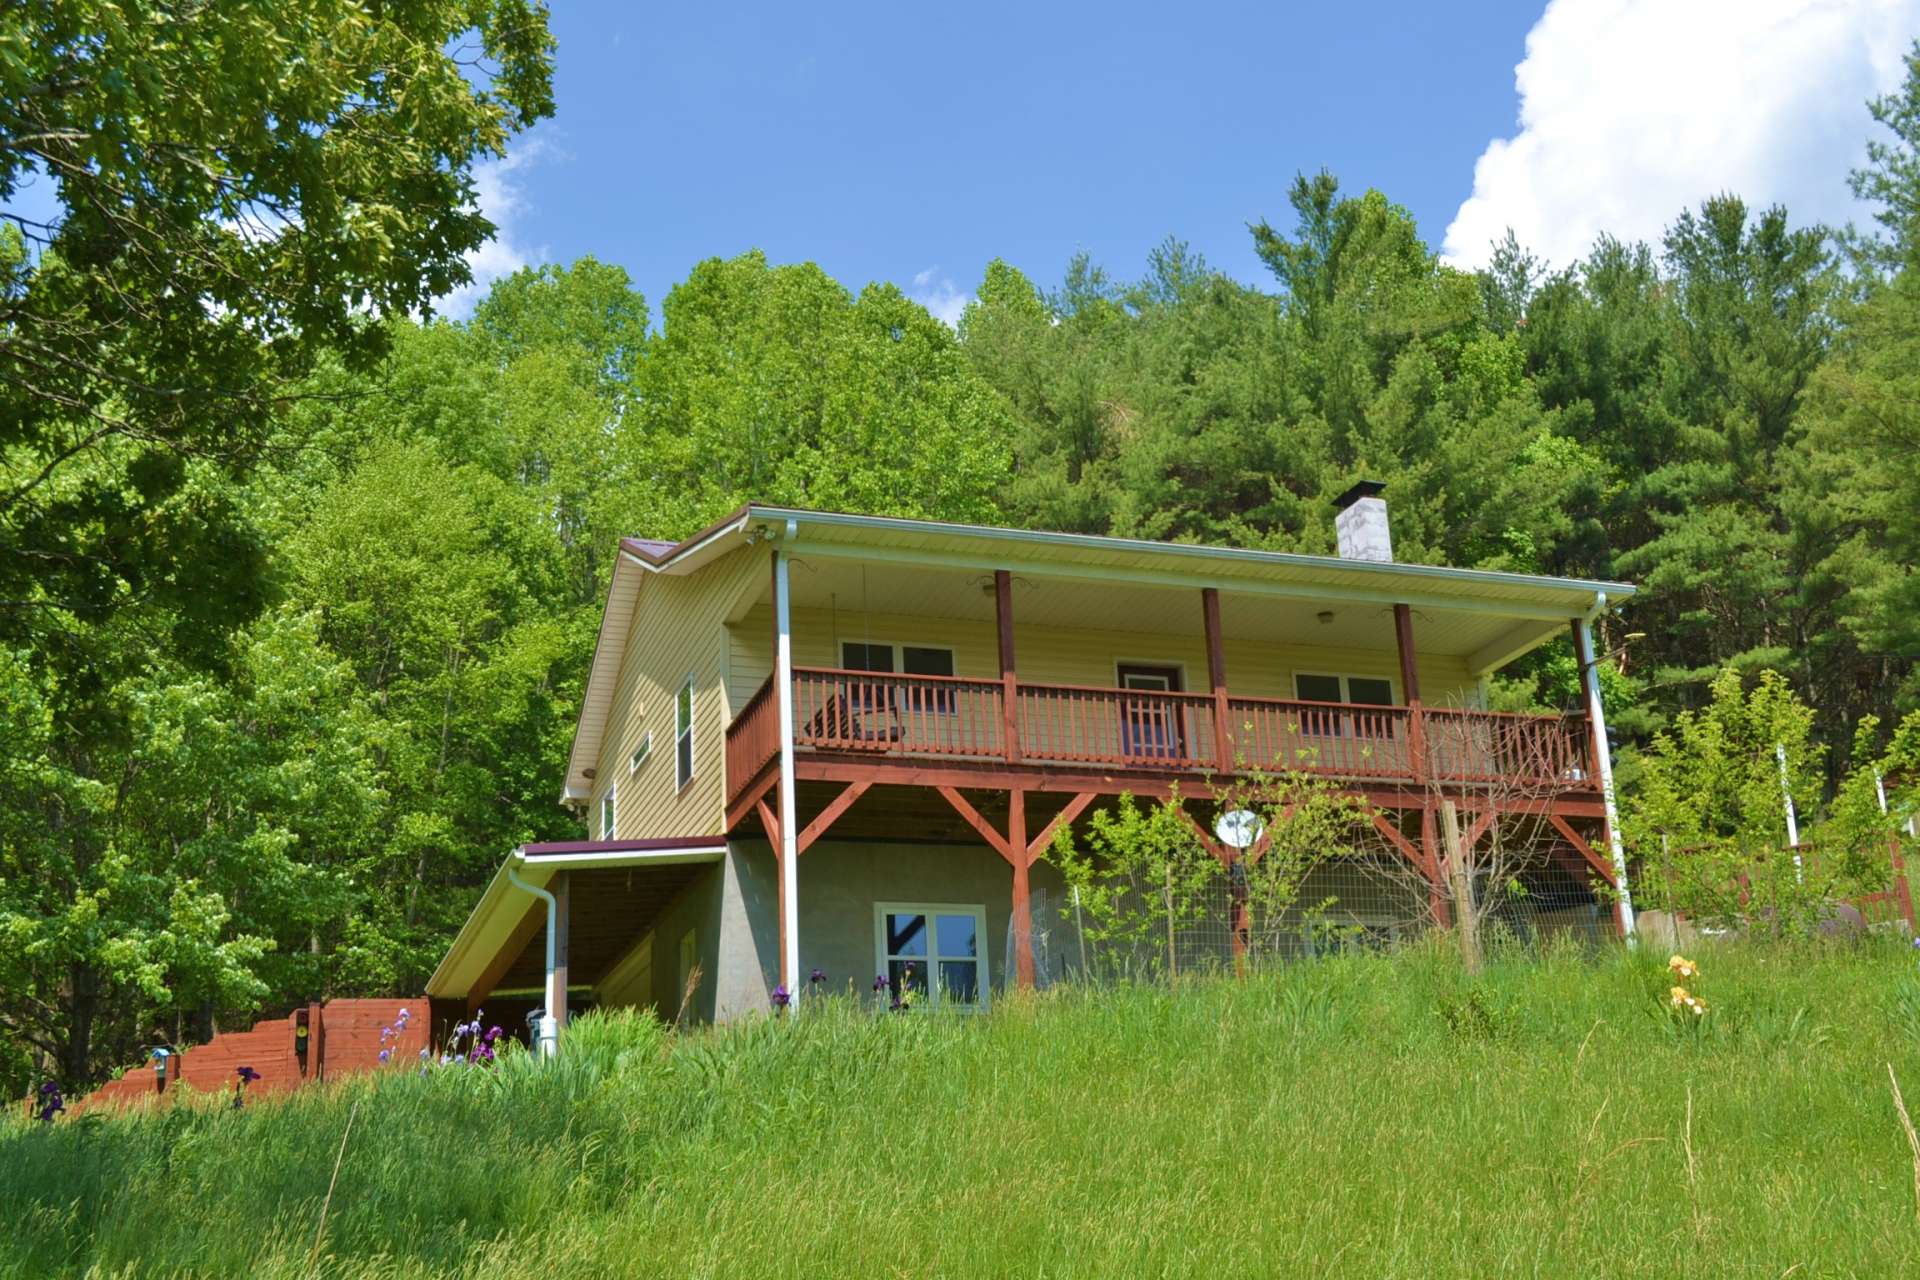 Offered at only $169,900, this 2-bedroom, 2-bath mountain cottage with fabulous long range mountain views is hidden among 6.95 acres in Kindrick Mountain, a private mountain community close to the New River and Grayson Highlands area. This property is waiting for your personal touches for the perfect Southwest Virginia mountain retreat or mini-farm. T164